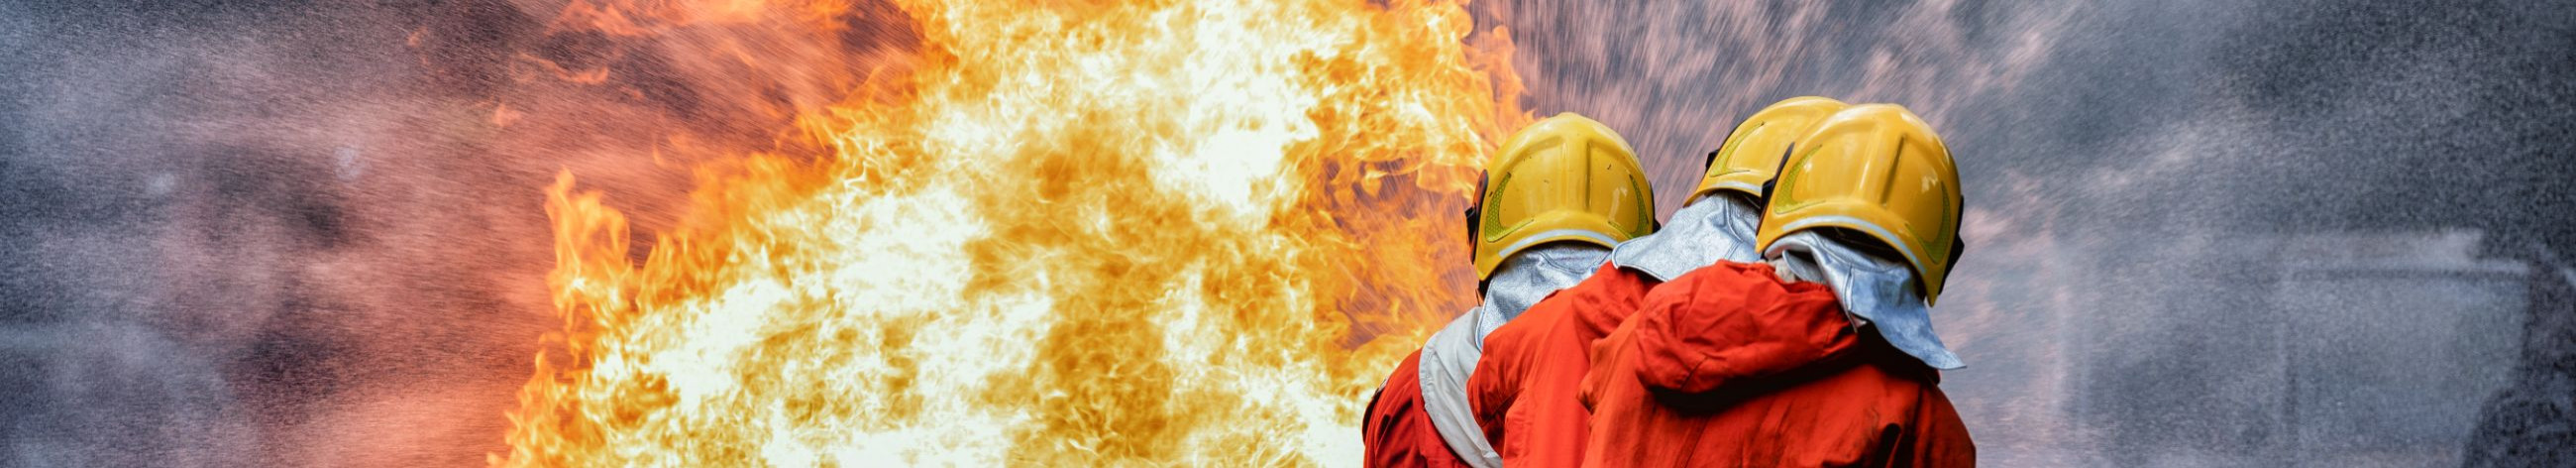 fire safety inspections, fire safety management, fire safety training, preparation of safety plan, fire safety advice, fire safety strategies, installation of fire safety equipment, fire safety inspections, fire safety inspections, fire safety management